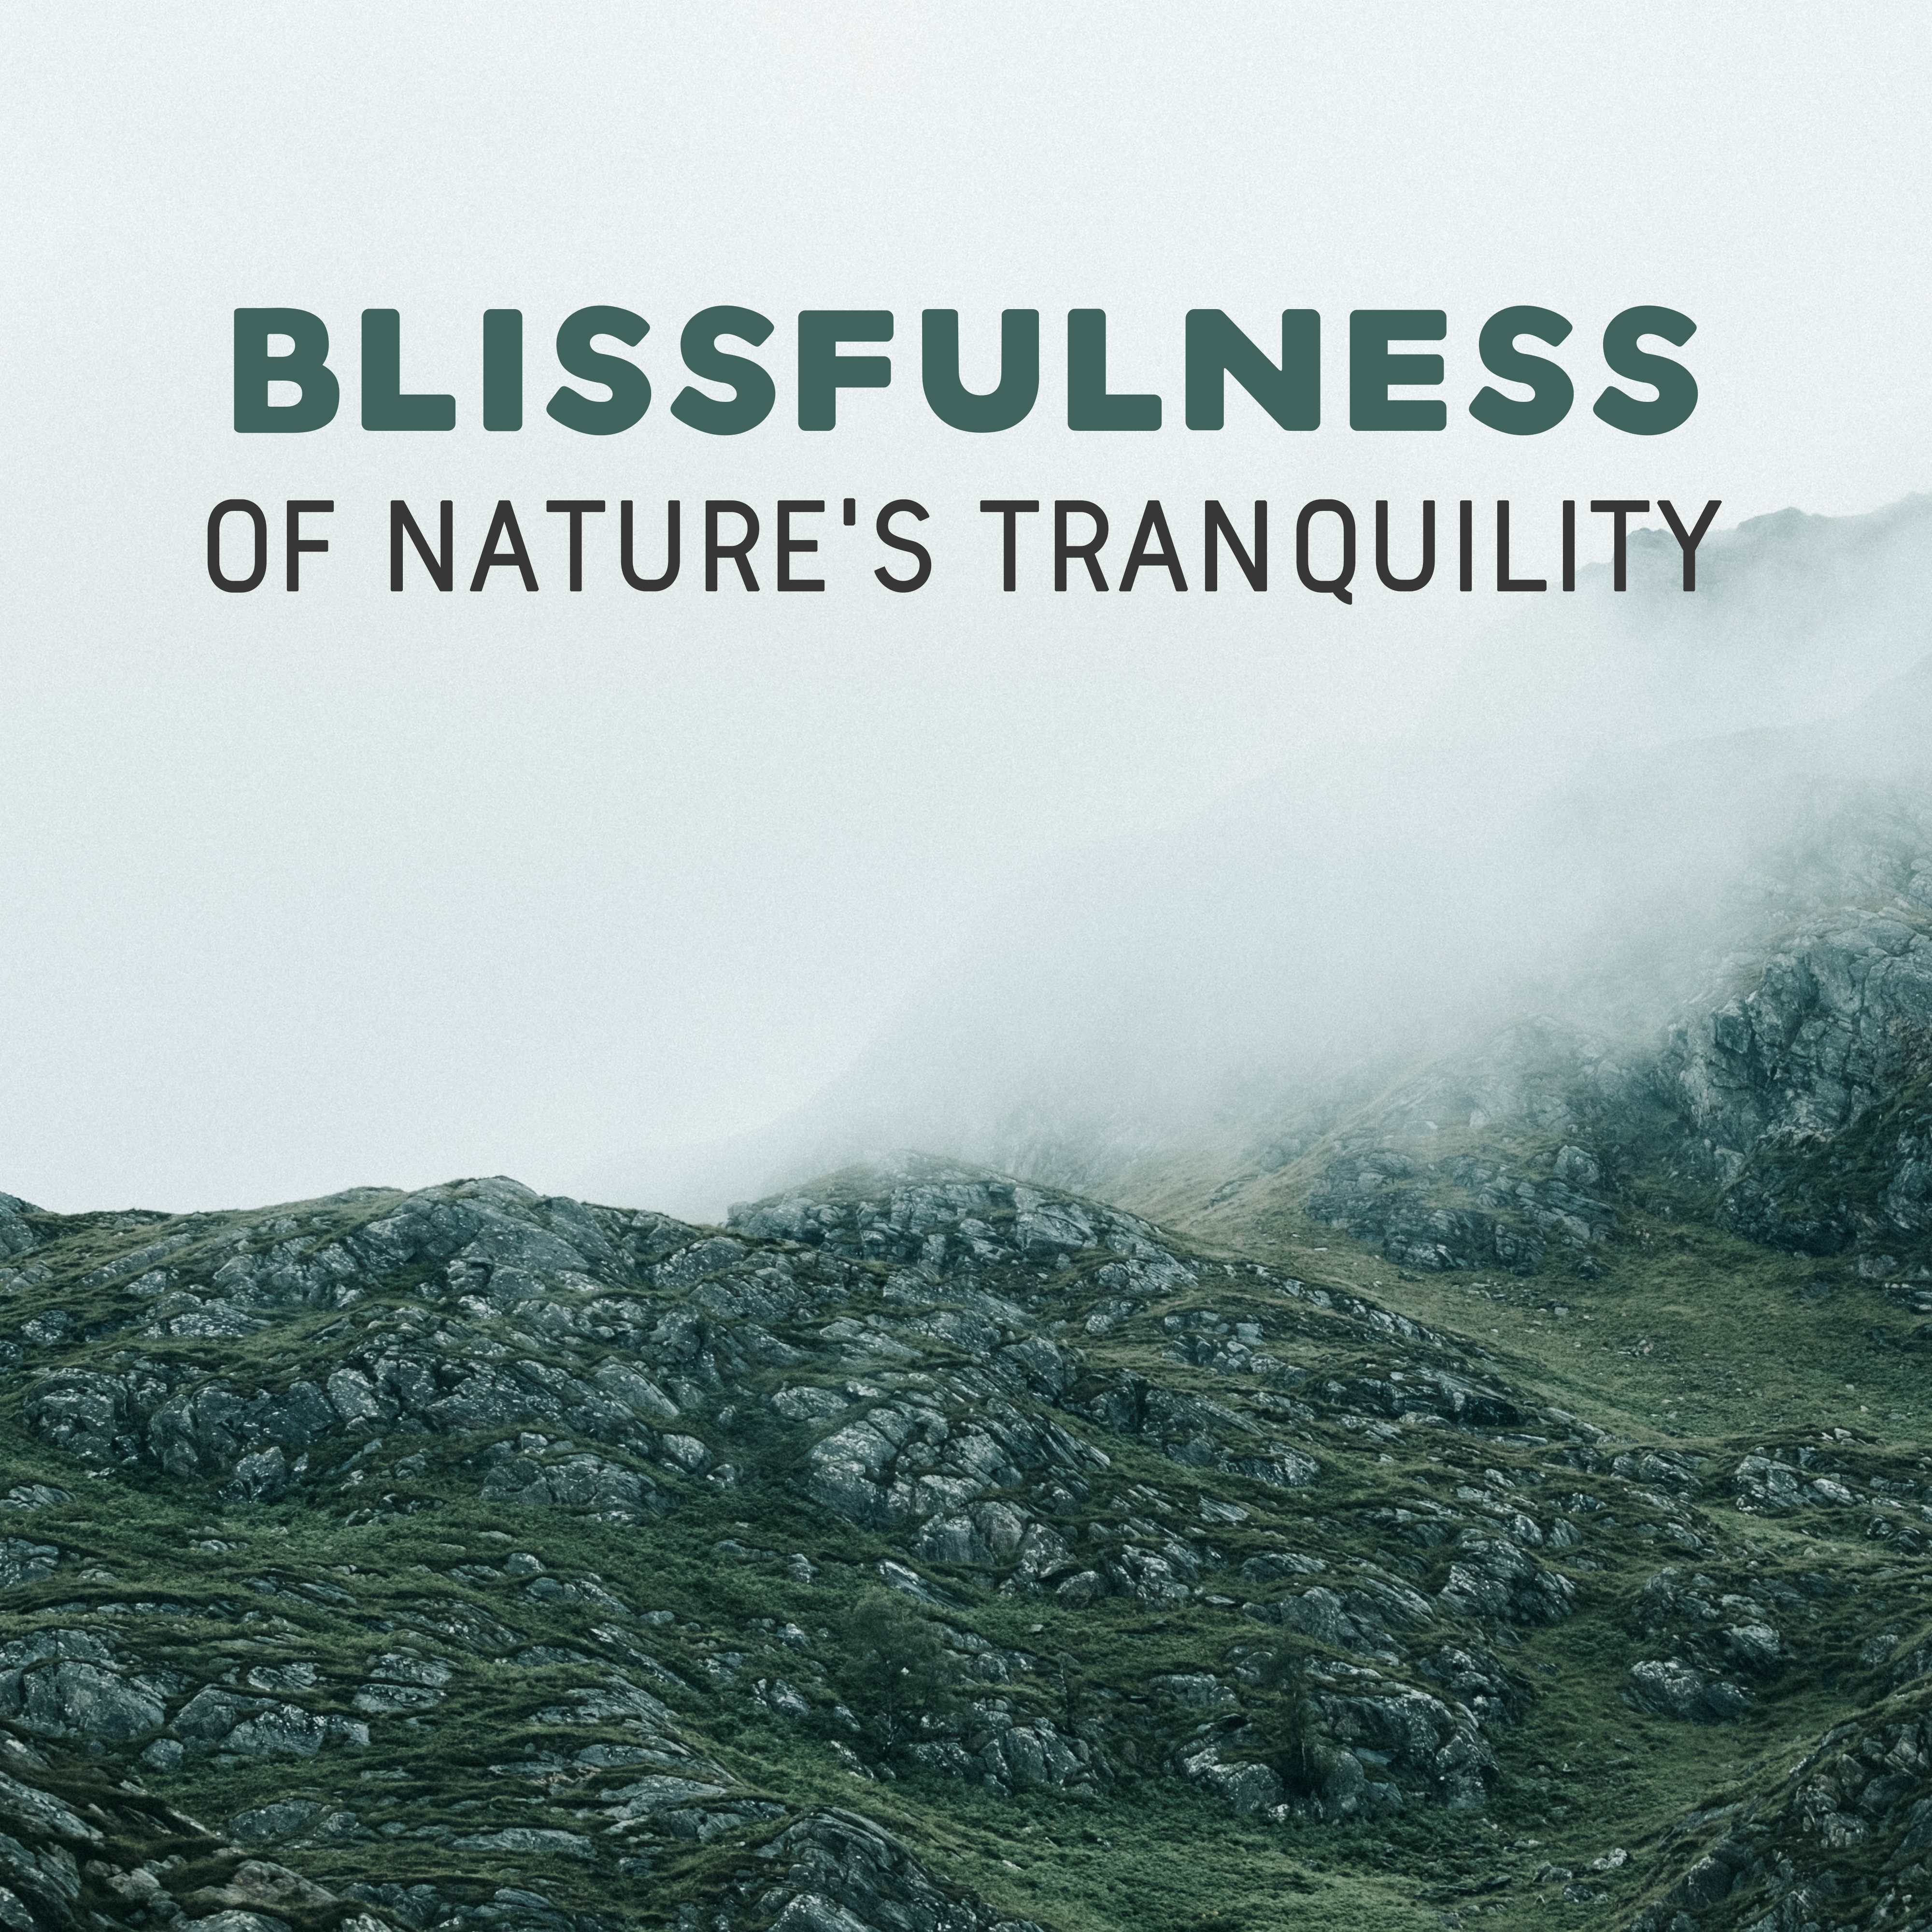 Blissfulness of Nature's Tranquility